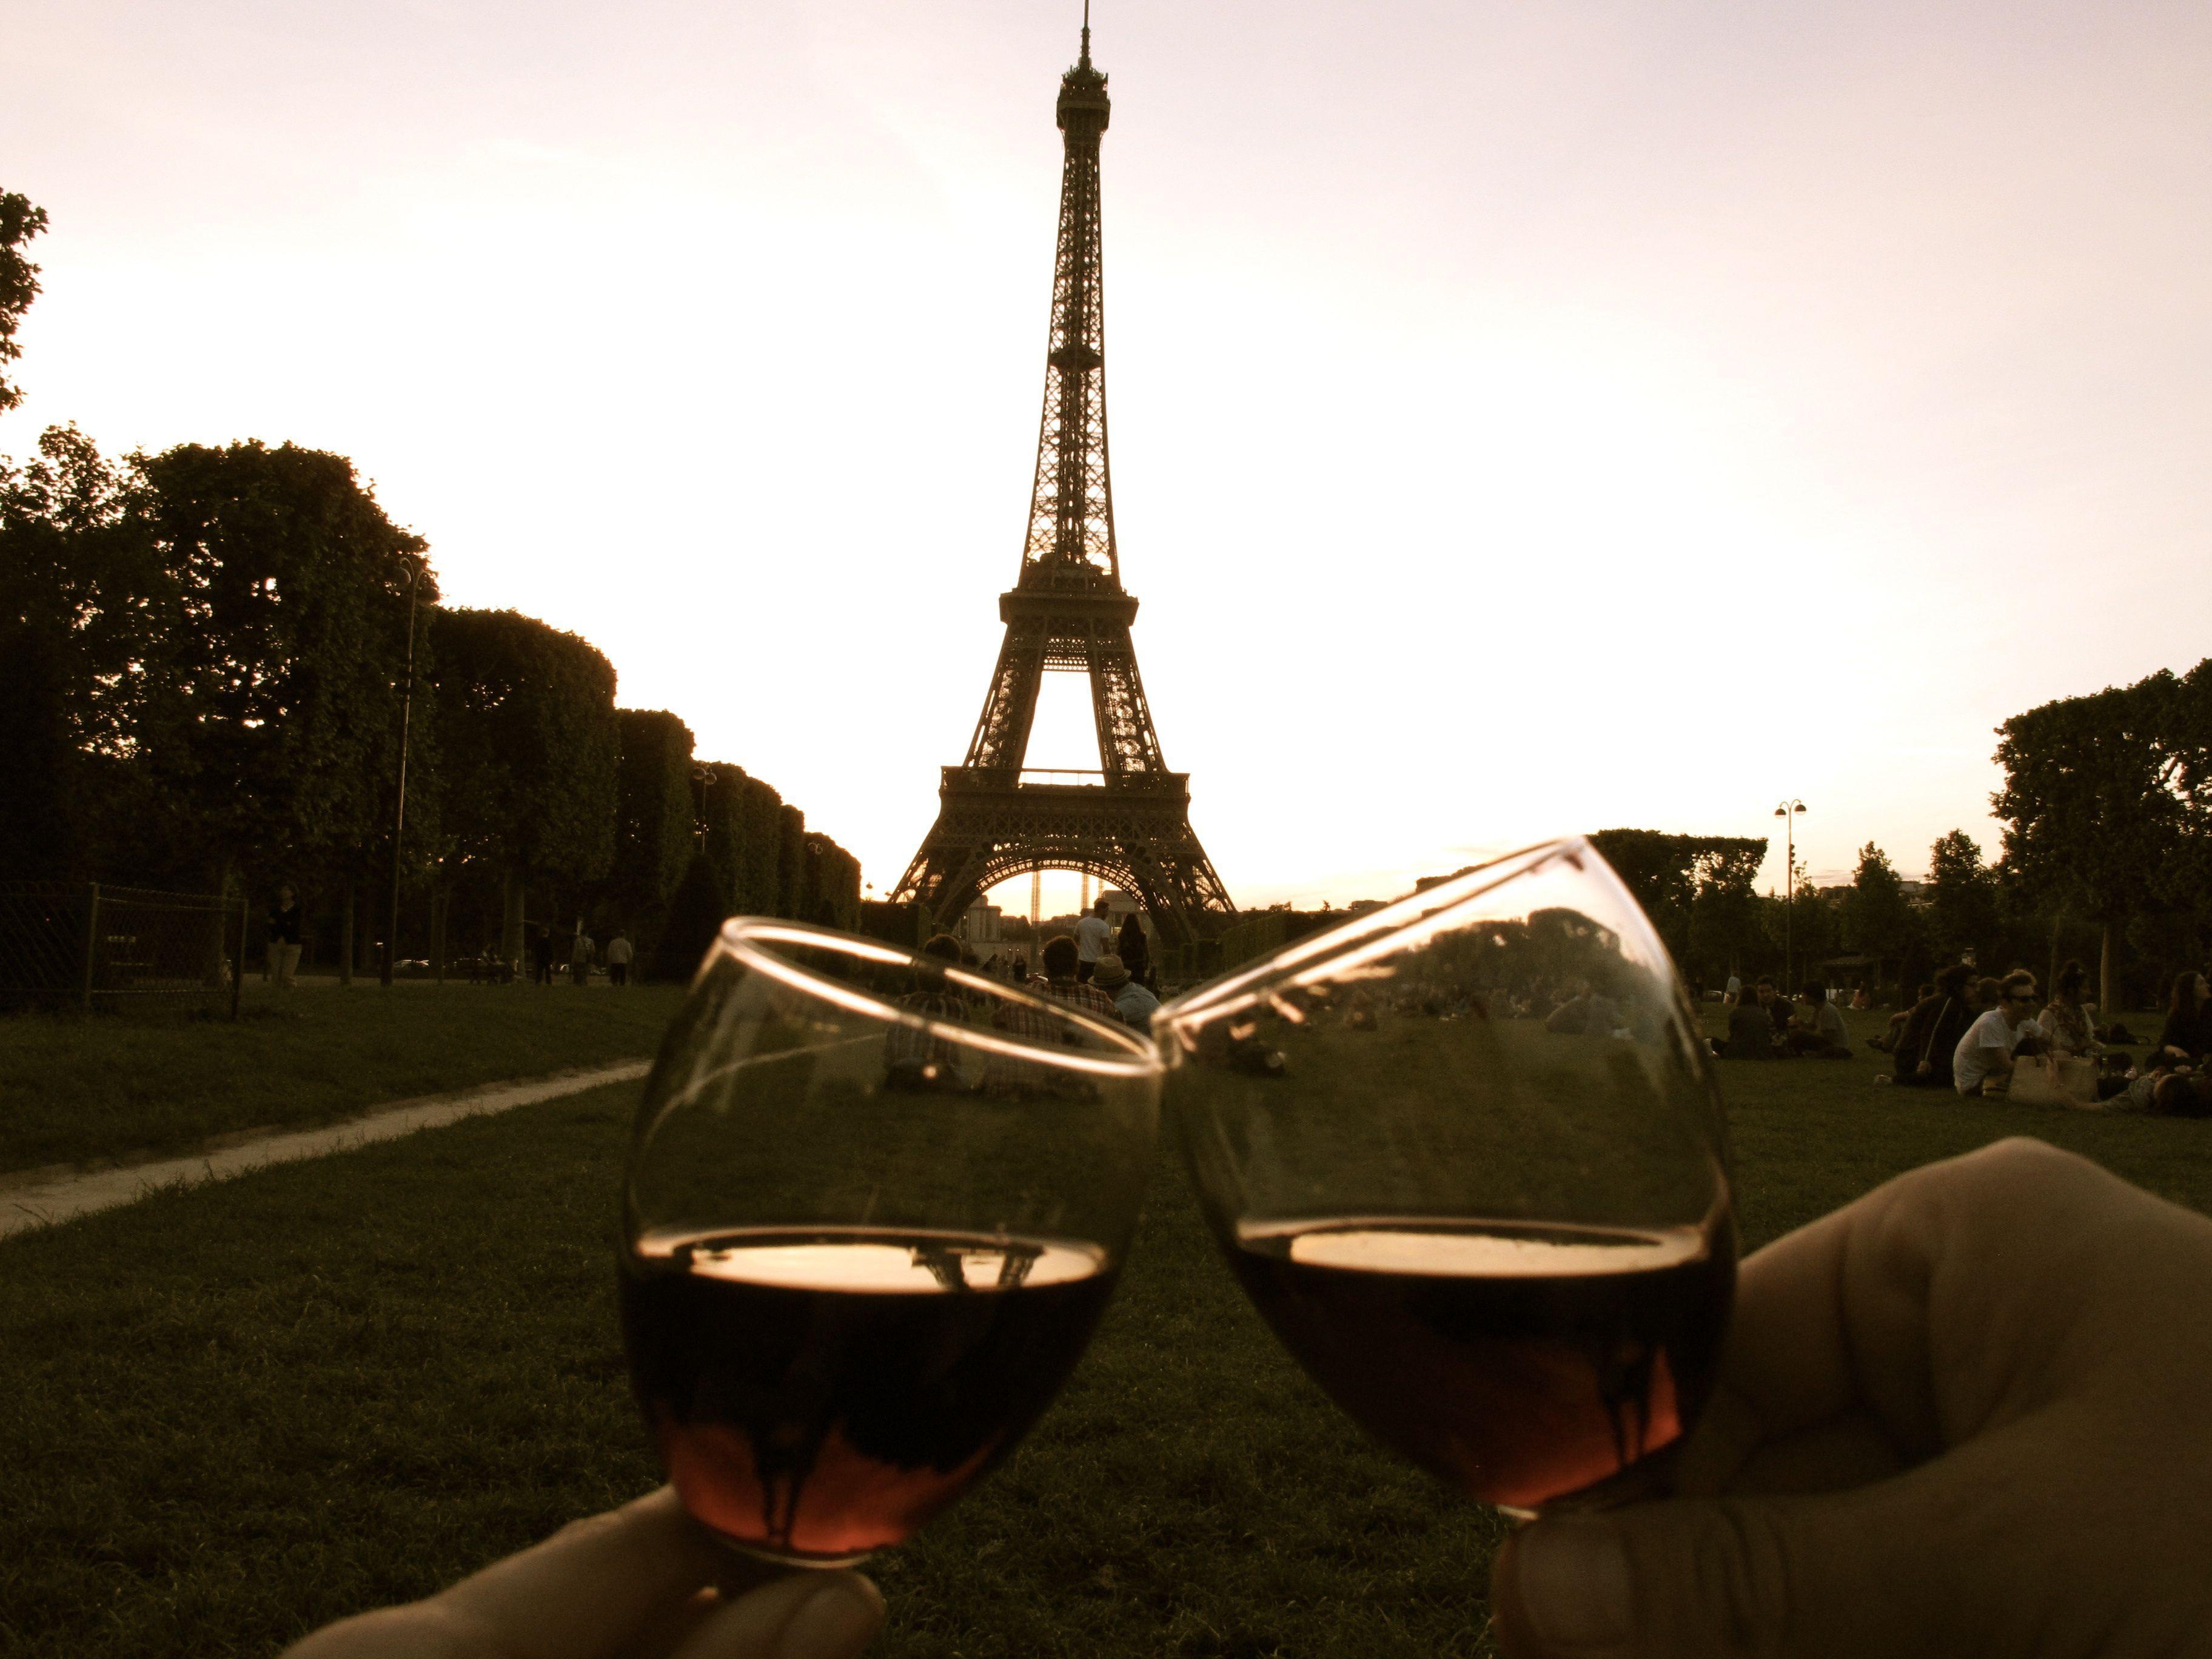 Red wine and the Eiffel Tower wallpaper and image